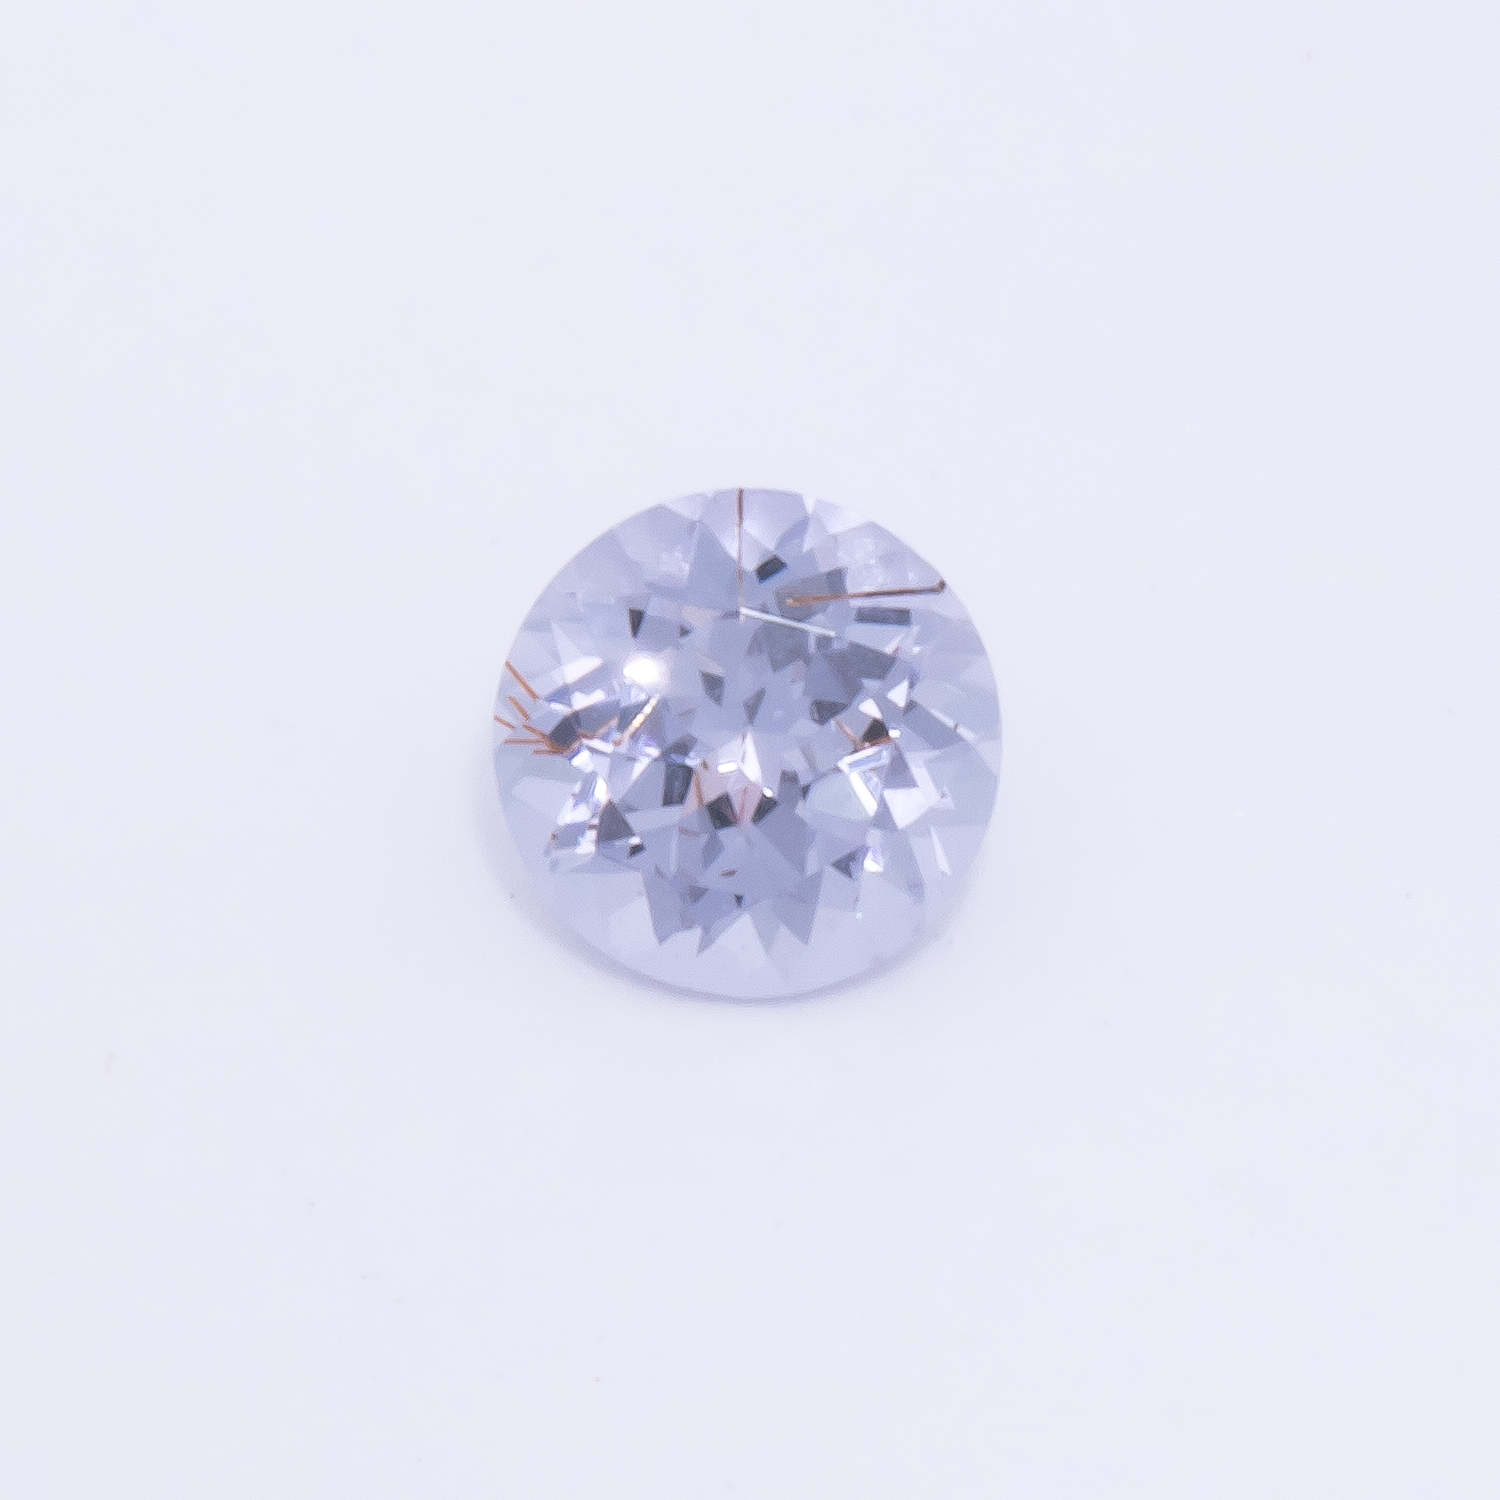 Spinell - lila, rund, 3.5x3.5 mm, 0.21 cts, Nr. SP90072